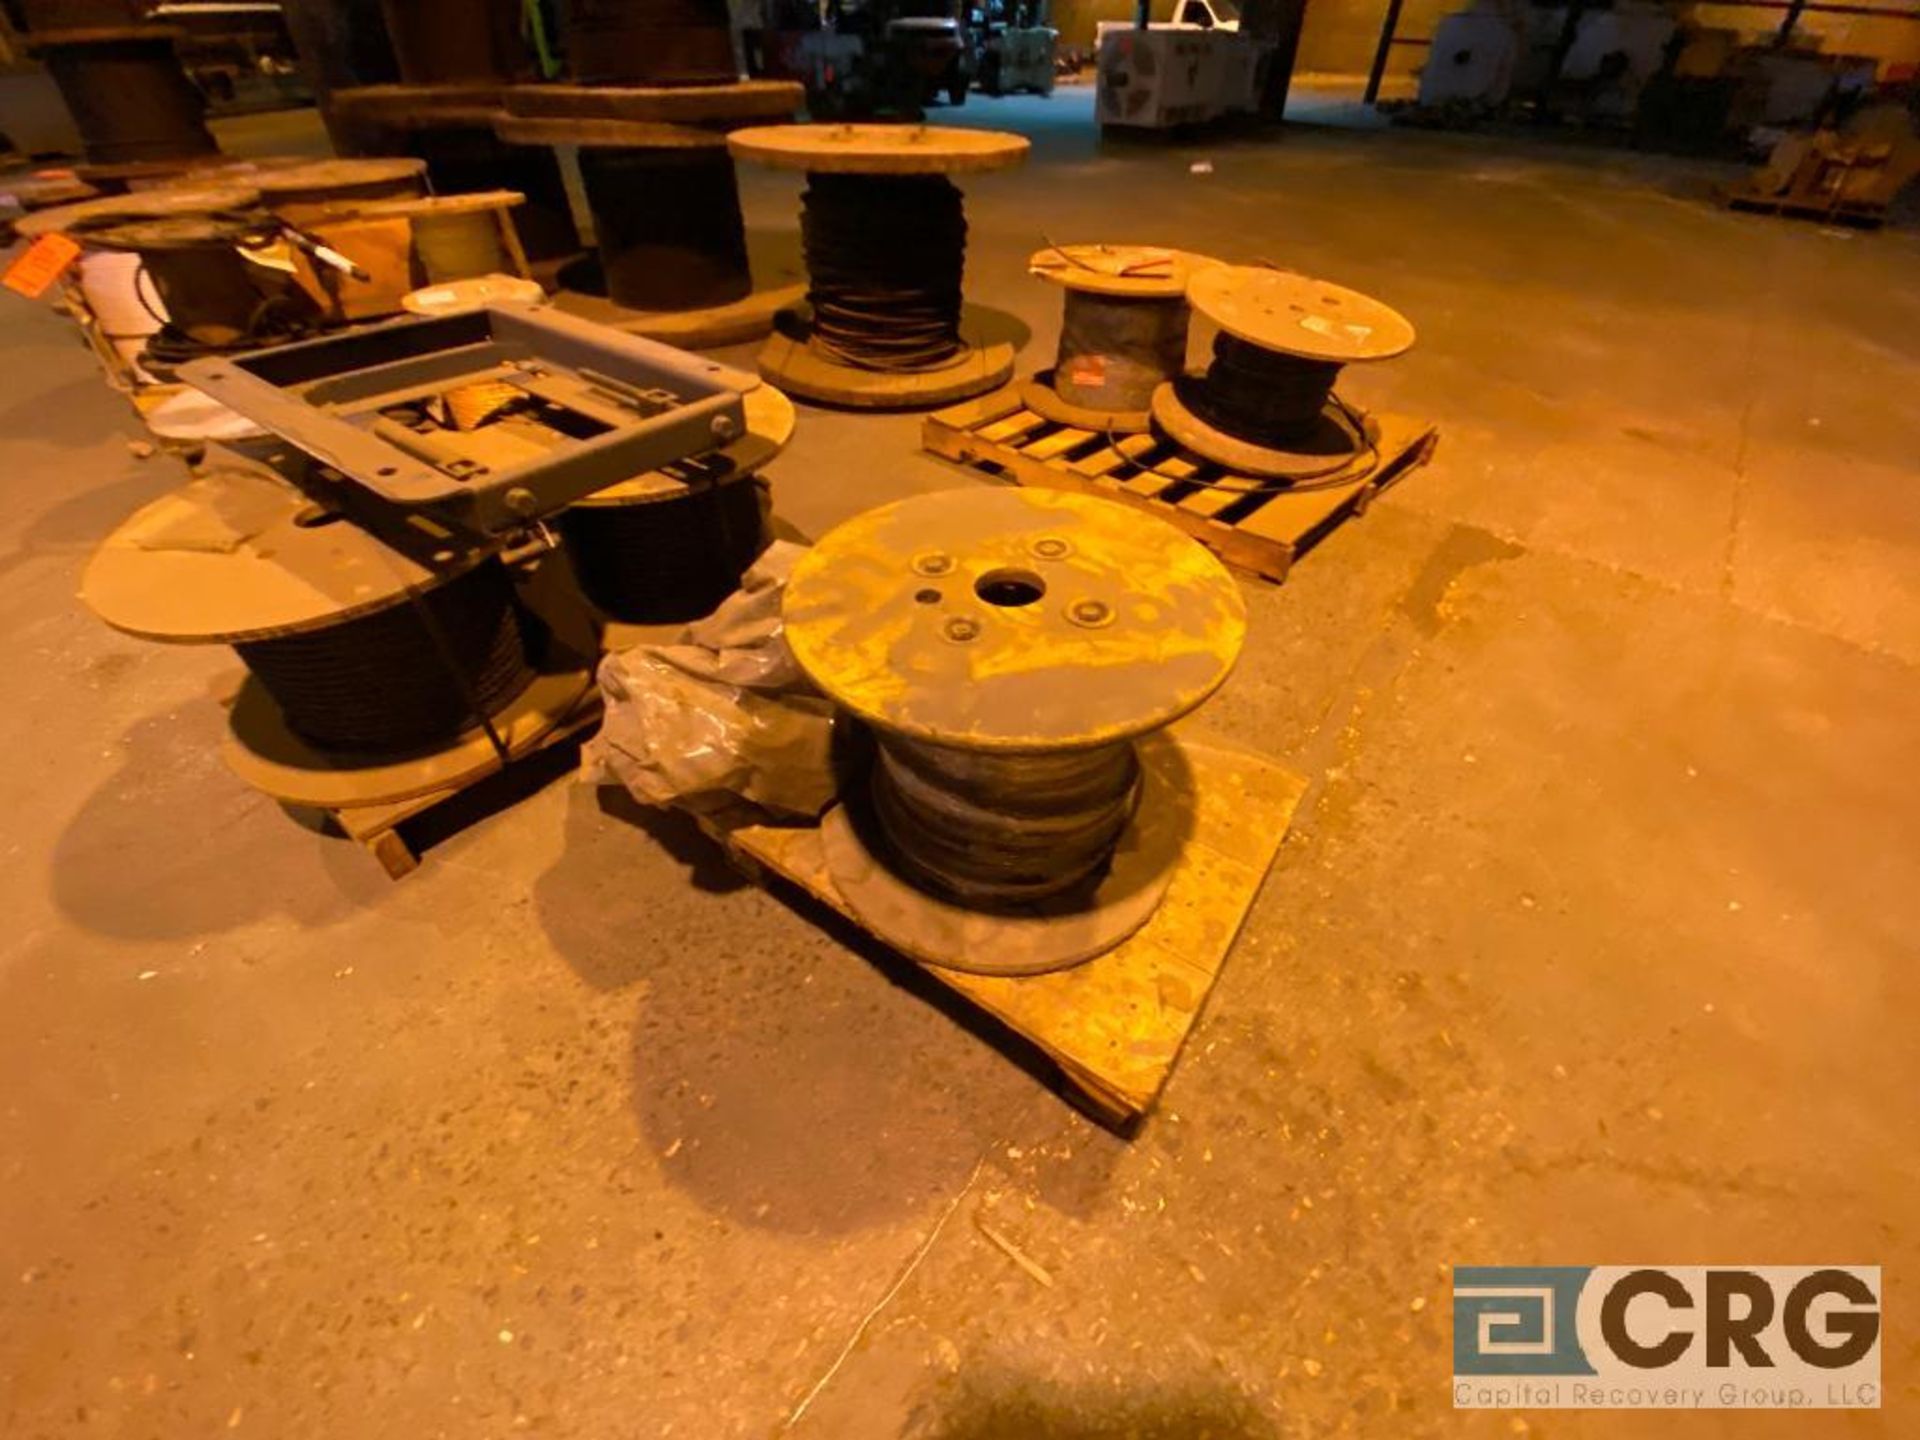 Lot of assorted spools, copper wire spools, braided cable spools, and rope spools (Location: RNP - Image 2 of 13